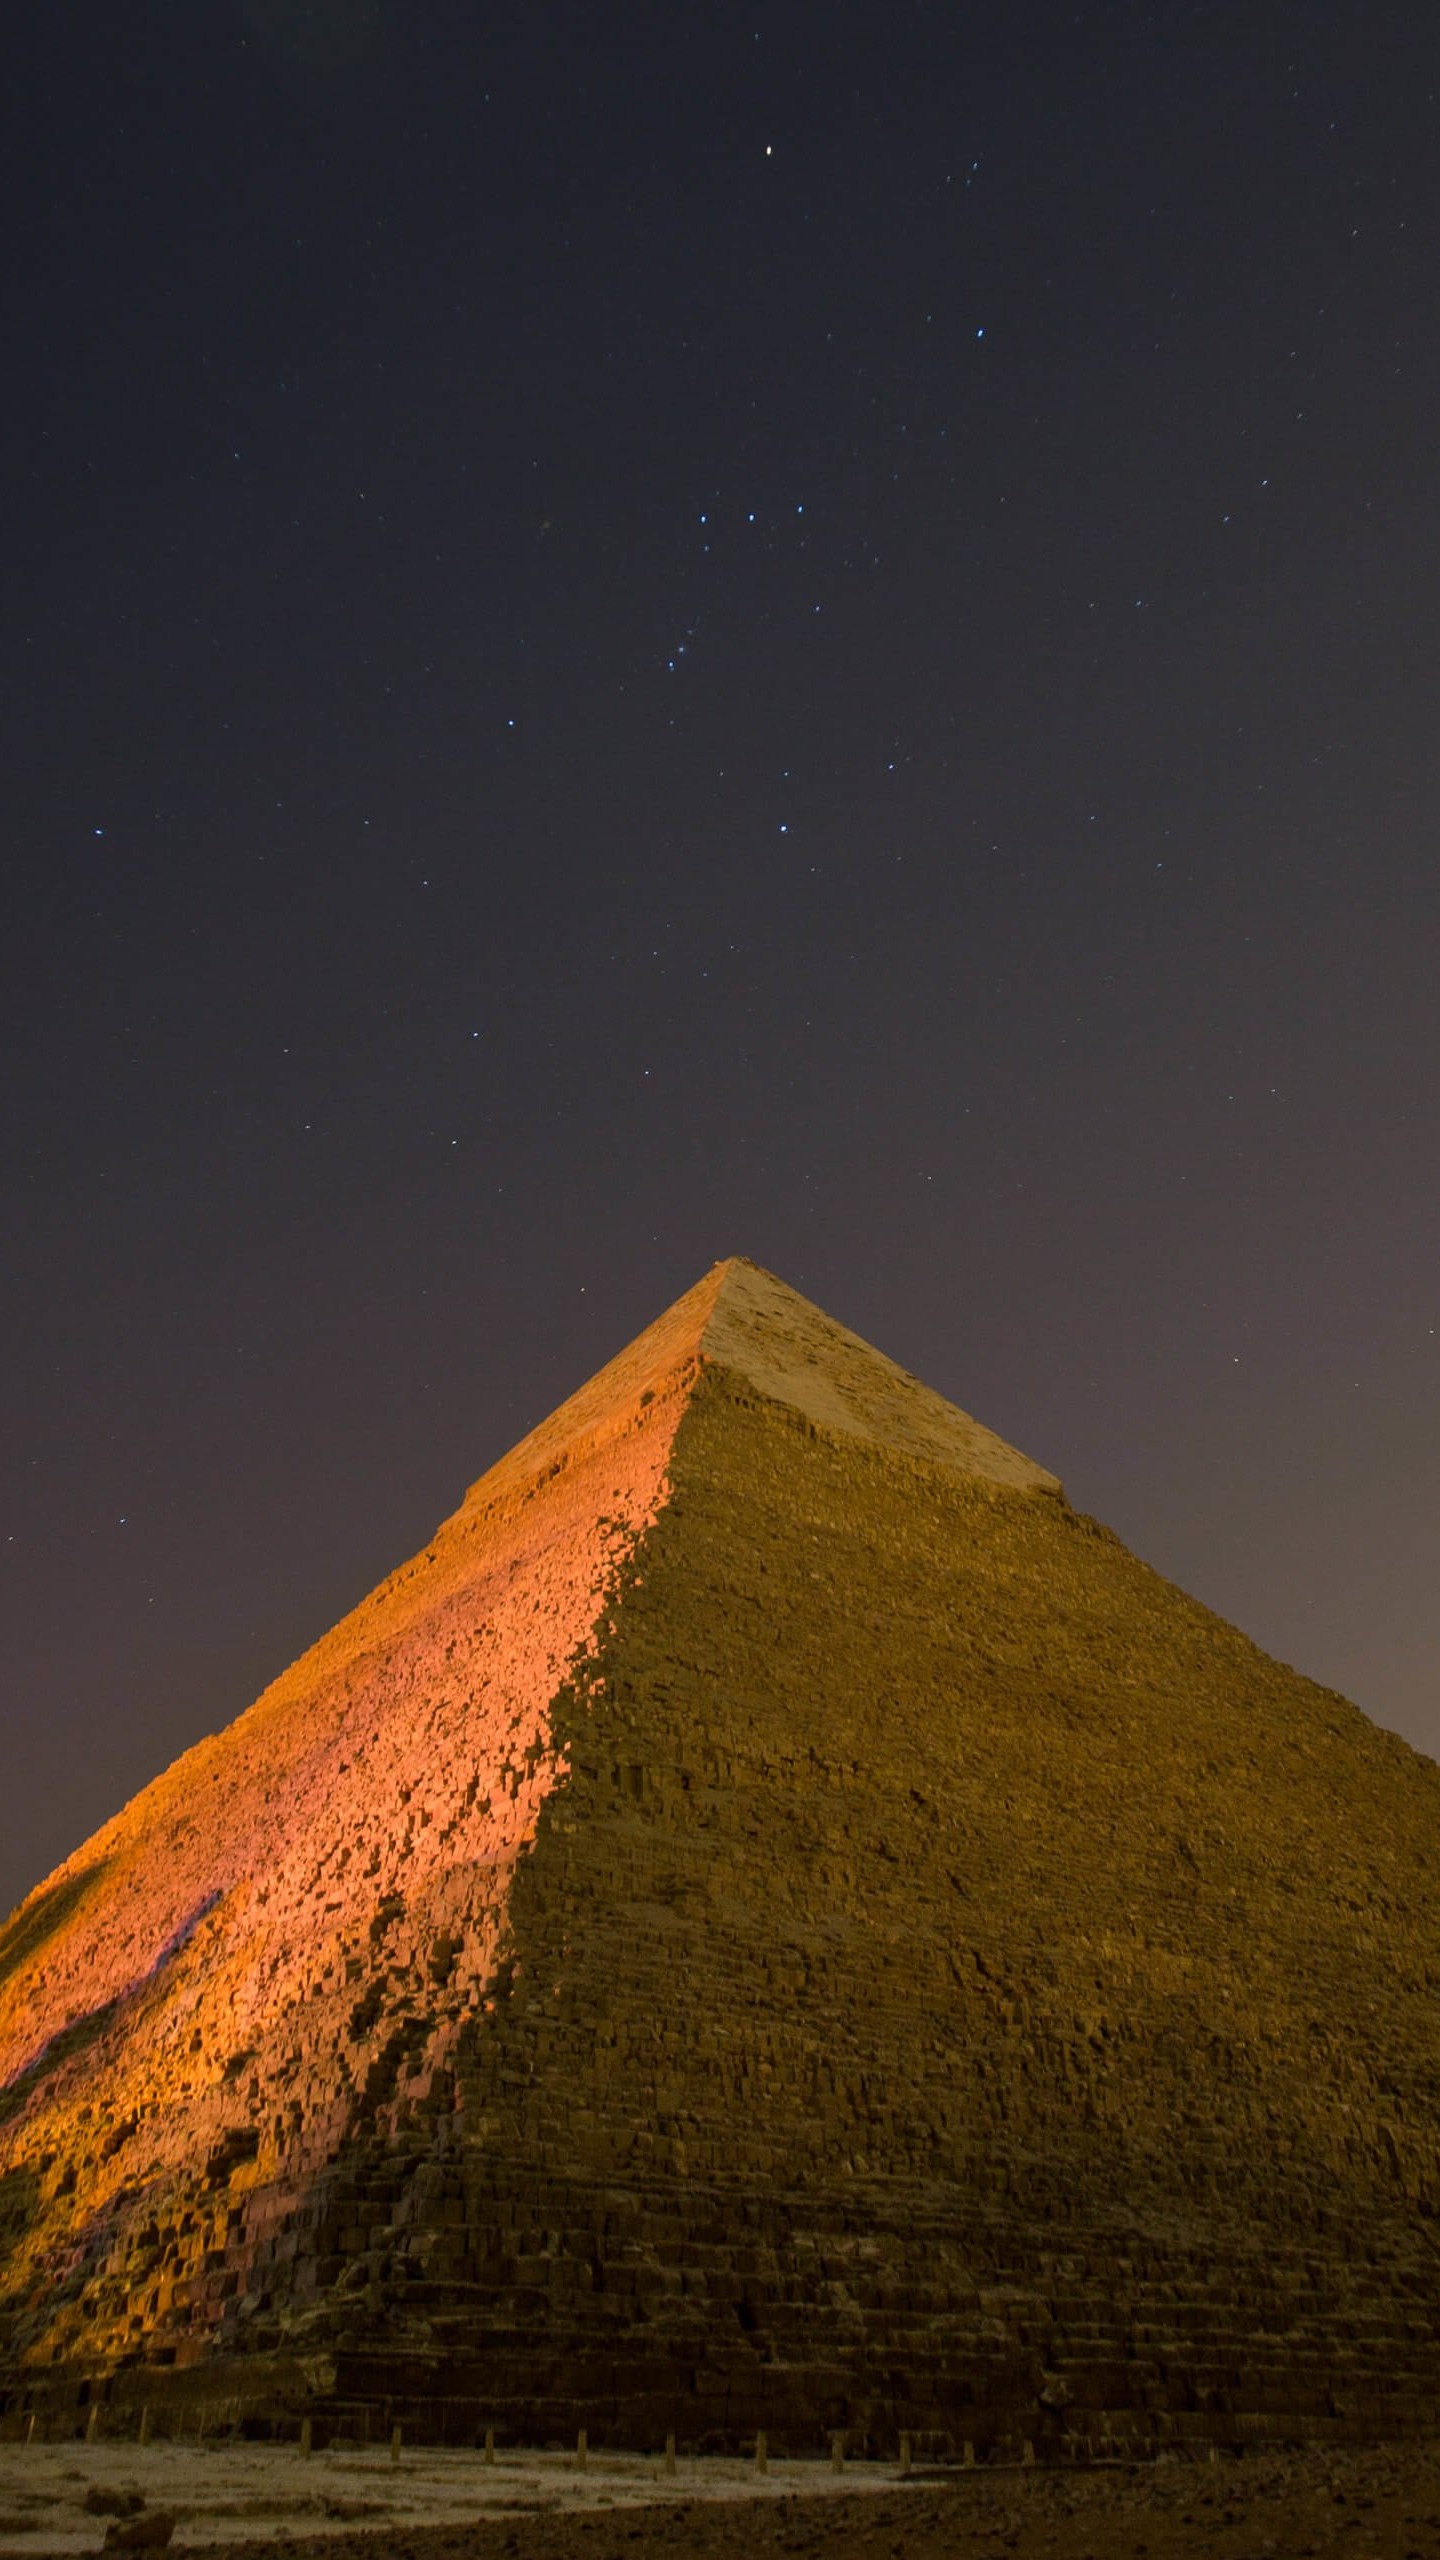 Pyramid by Night Wallpaper for LG G3